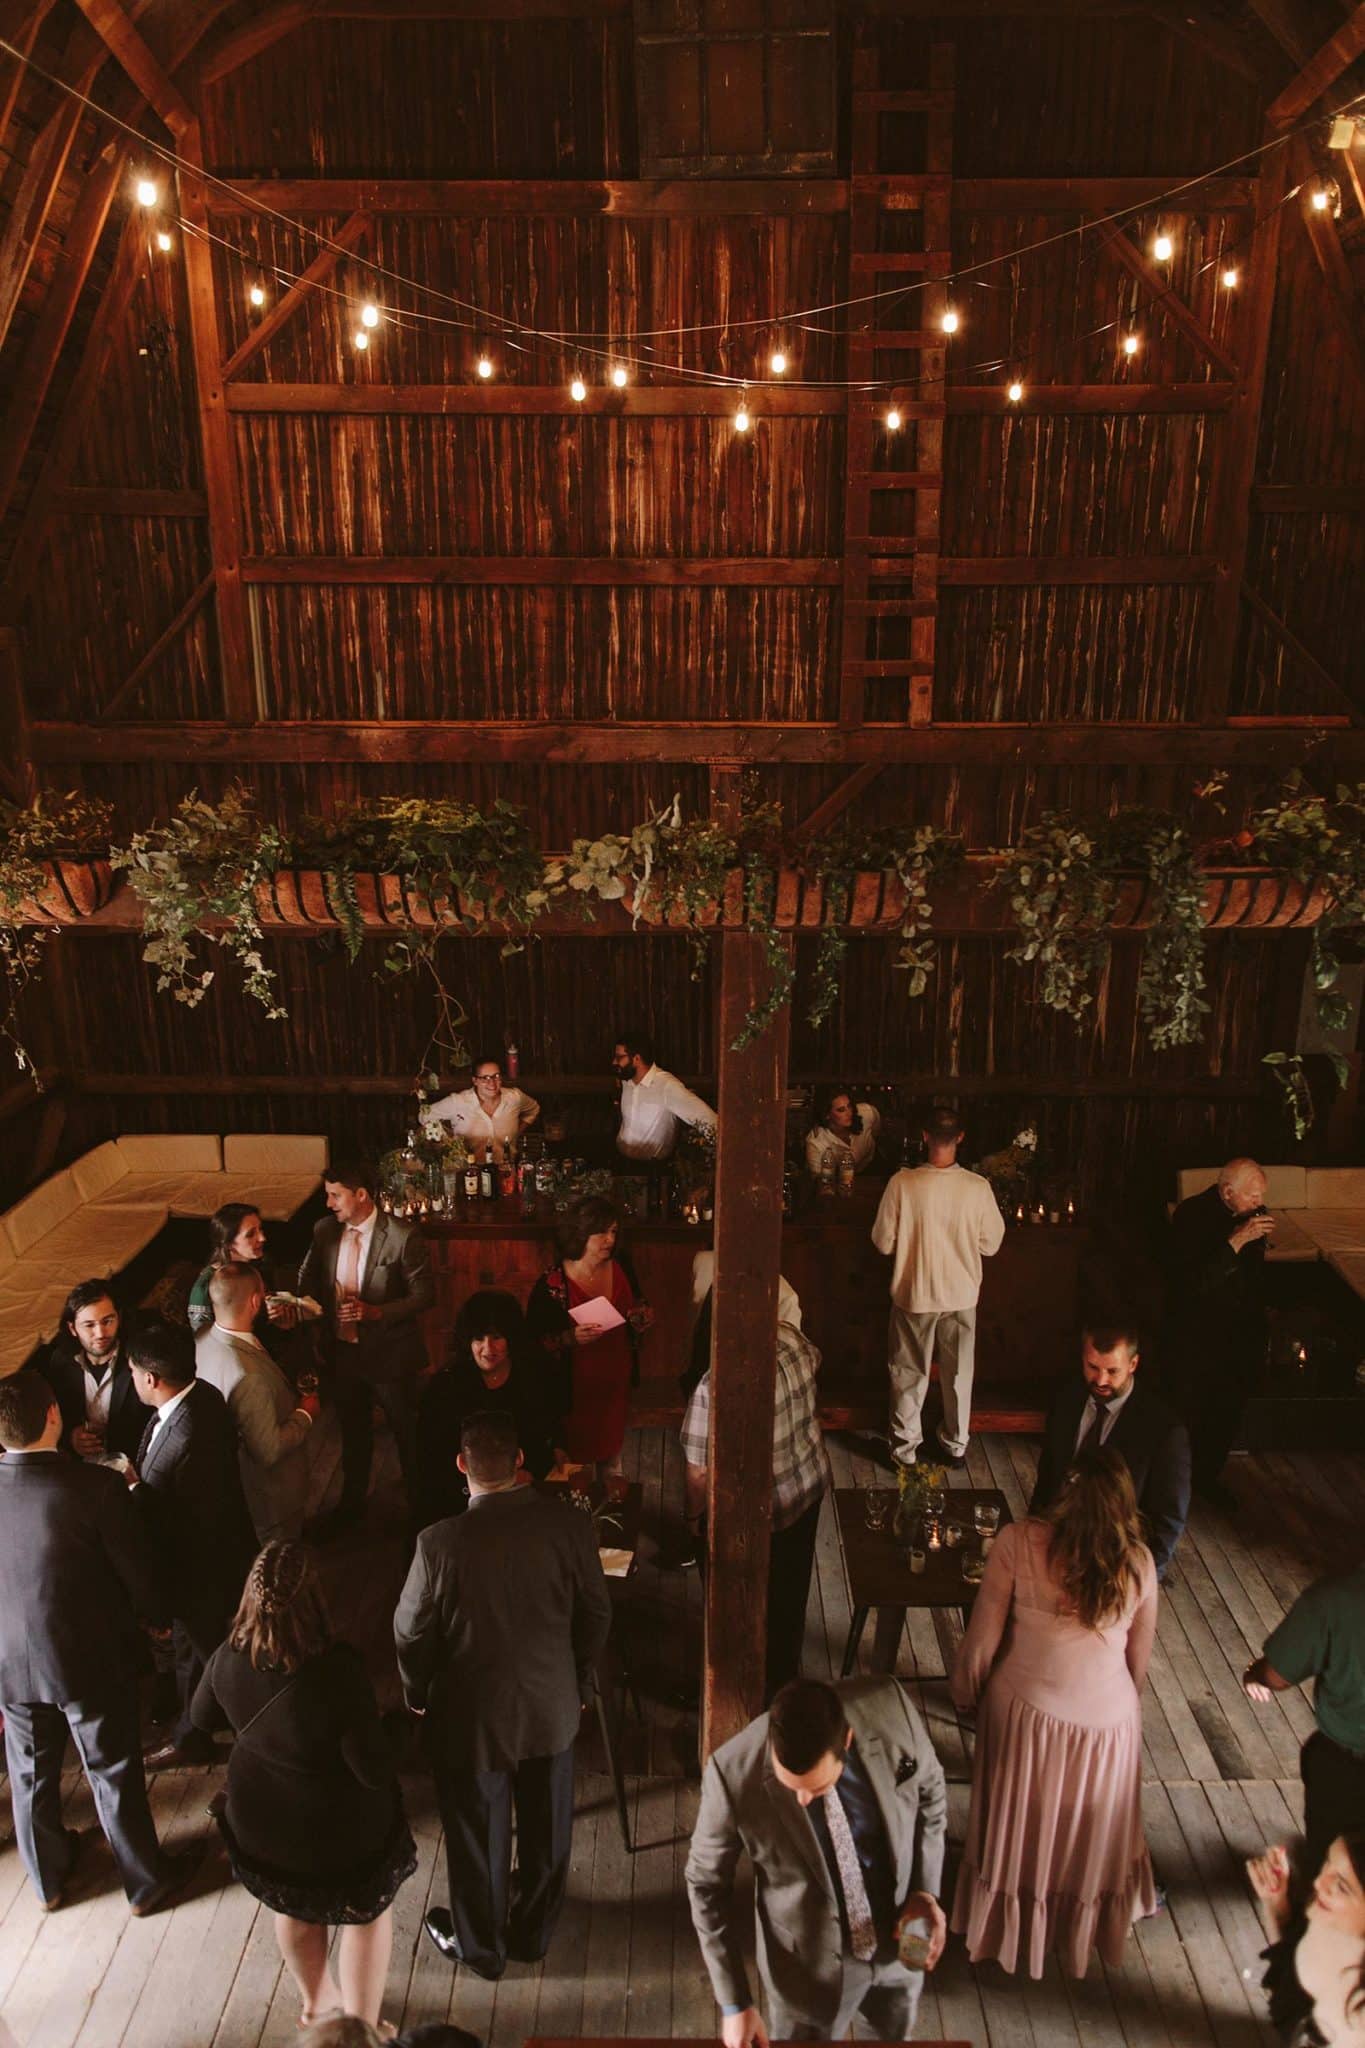 inside view of a wooden bar with lights hanging and wedding party